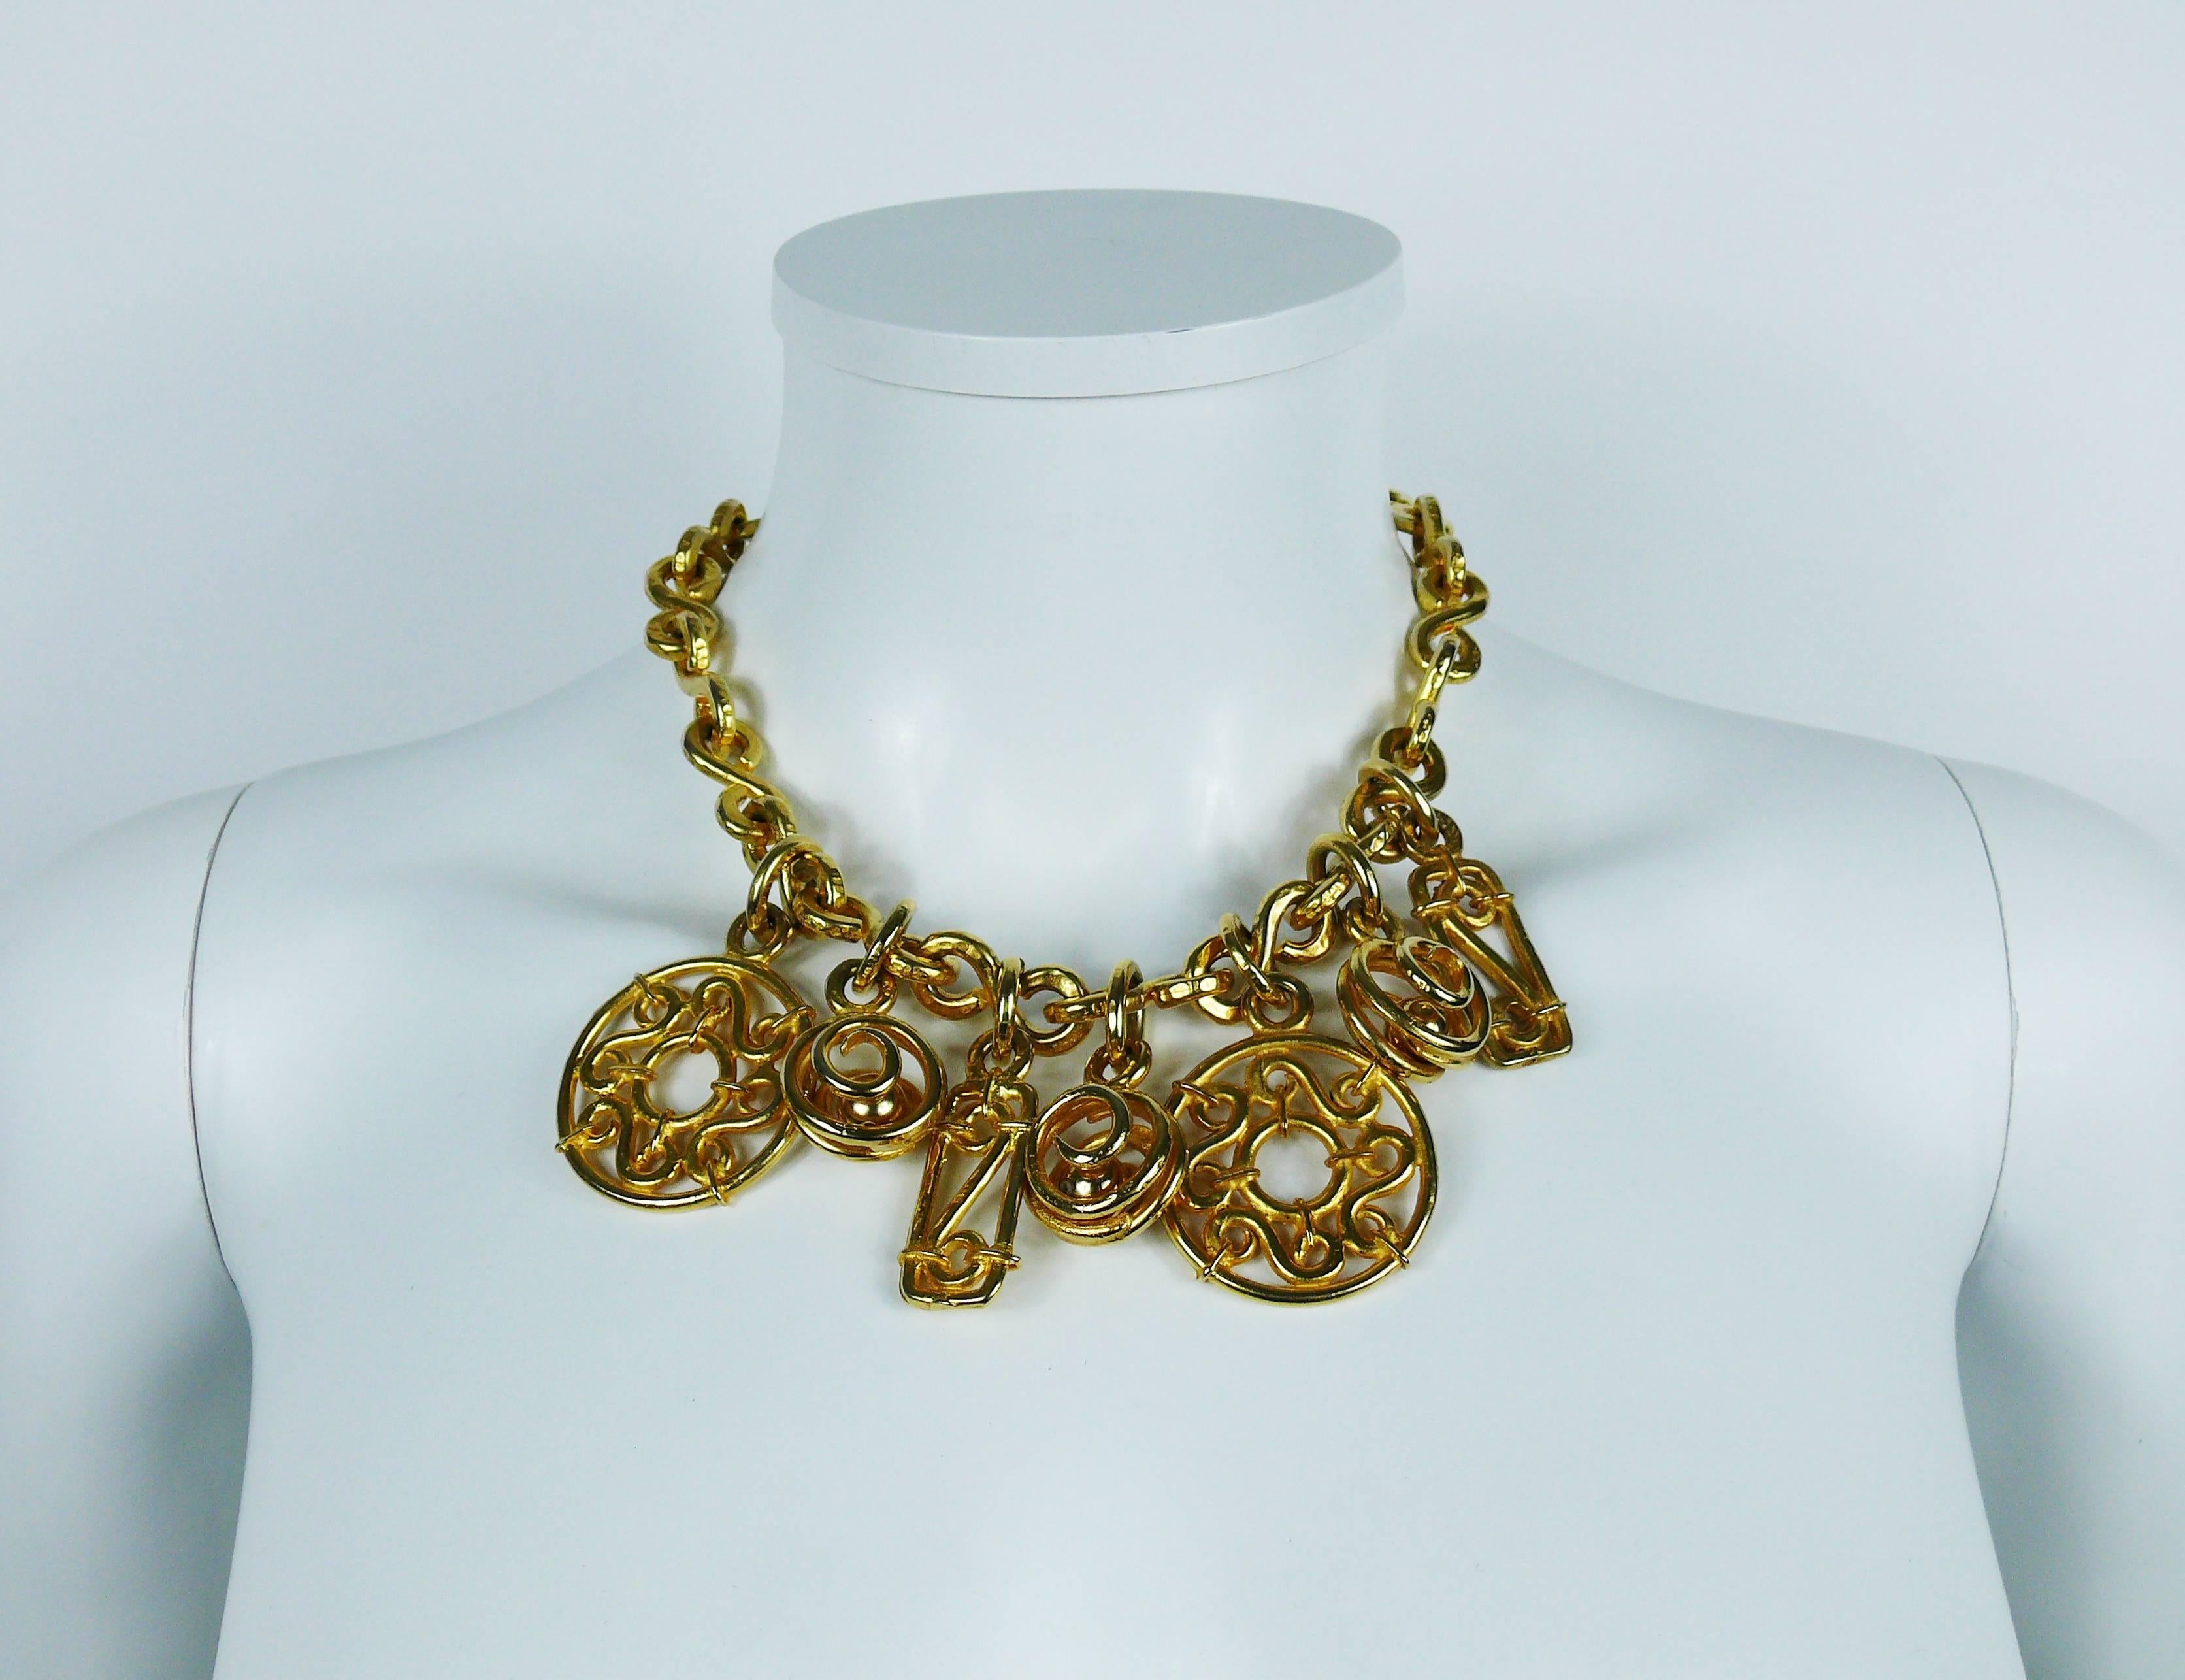 CELINE vintage gold toned necklace featuring a heavy hammered S-link chain holding seven charms including discs, rectangles and encaged balls with a gorgeous arabesque design.

T-bar and toggle closure.

Marked CELINE Paris Made in Italy